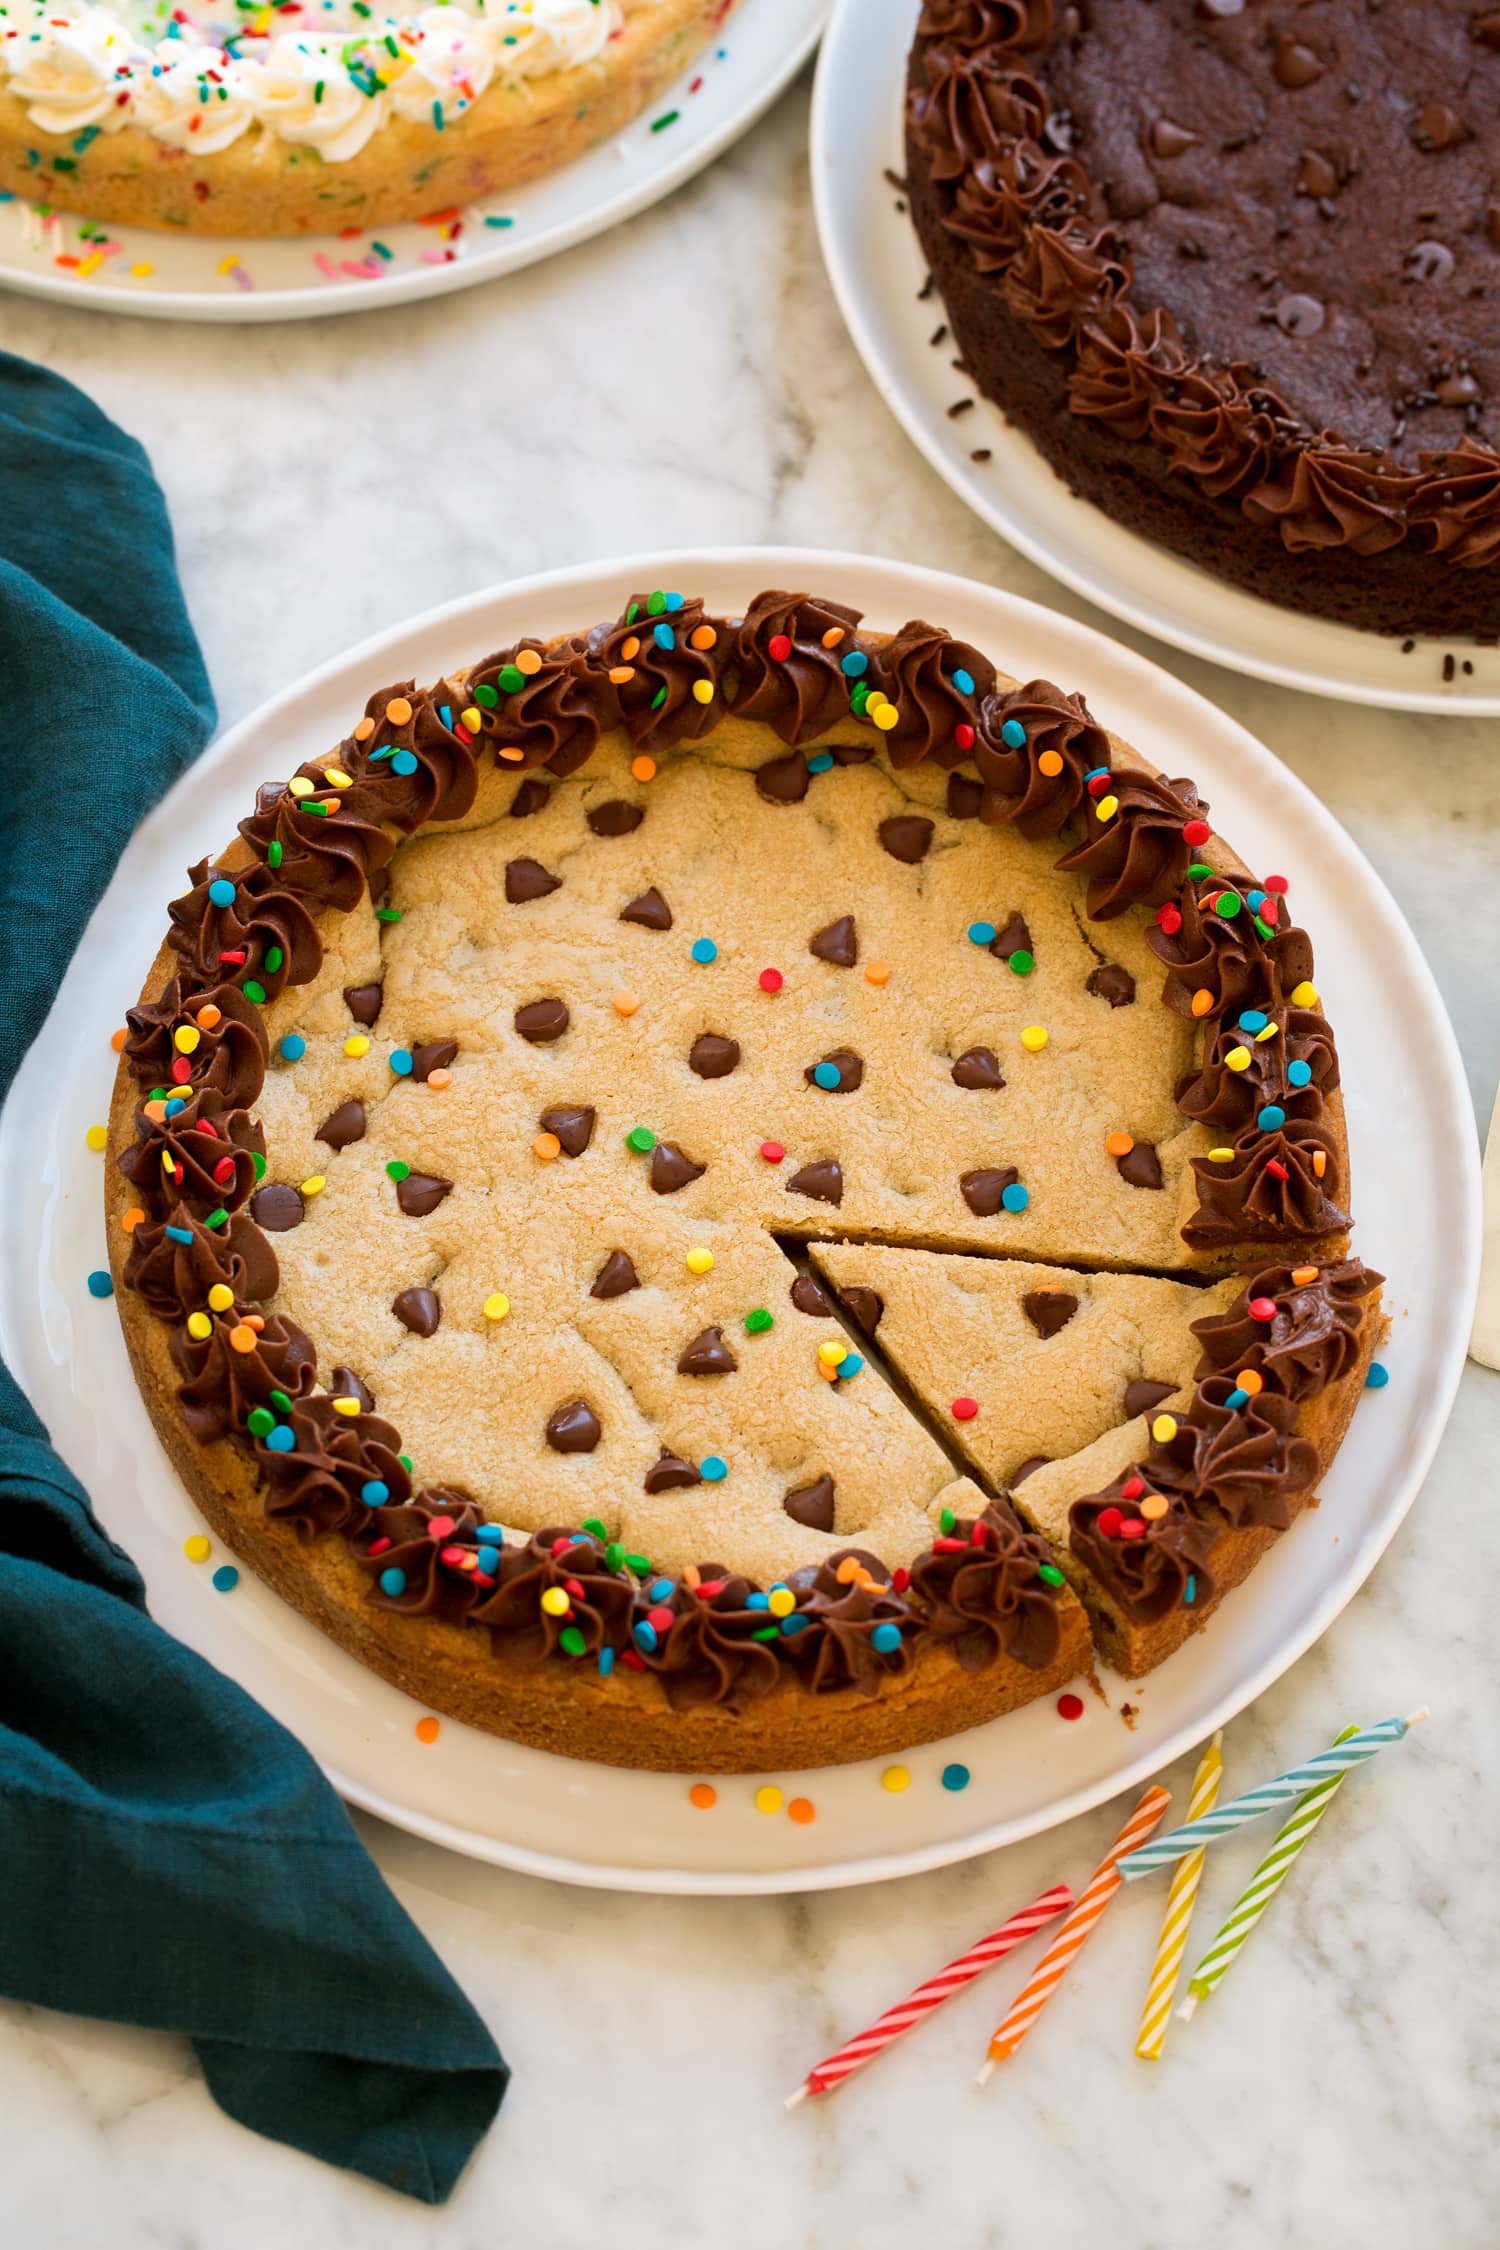 Chocolate chip cookie cake whole.